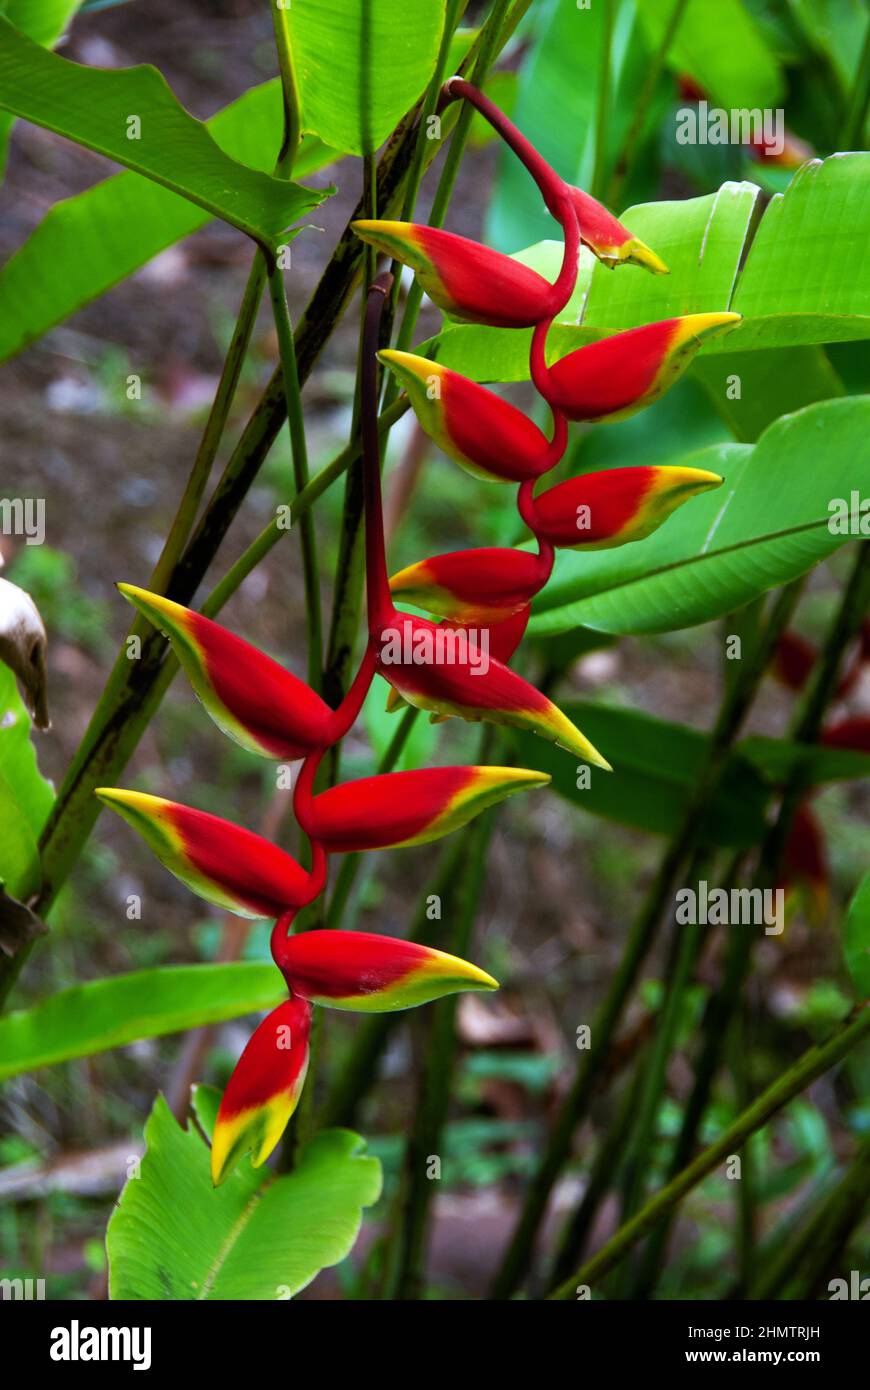 Heliconia rostrata (hanging lobster claw) is a herbaceous perennial plant native to South and Central America growing in rainforest. Stock Photo